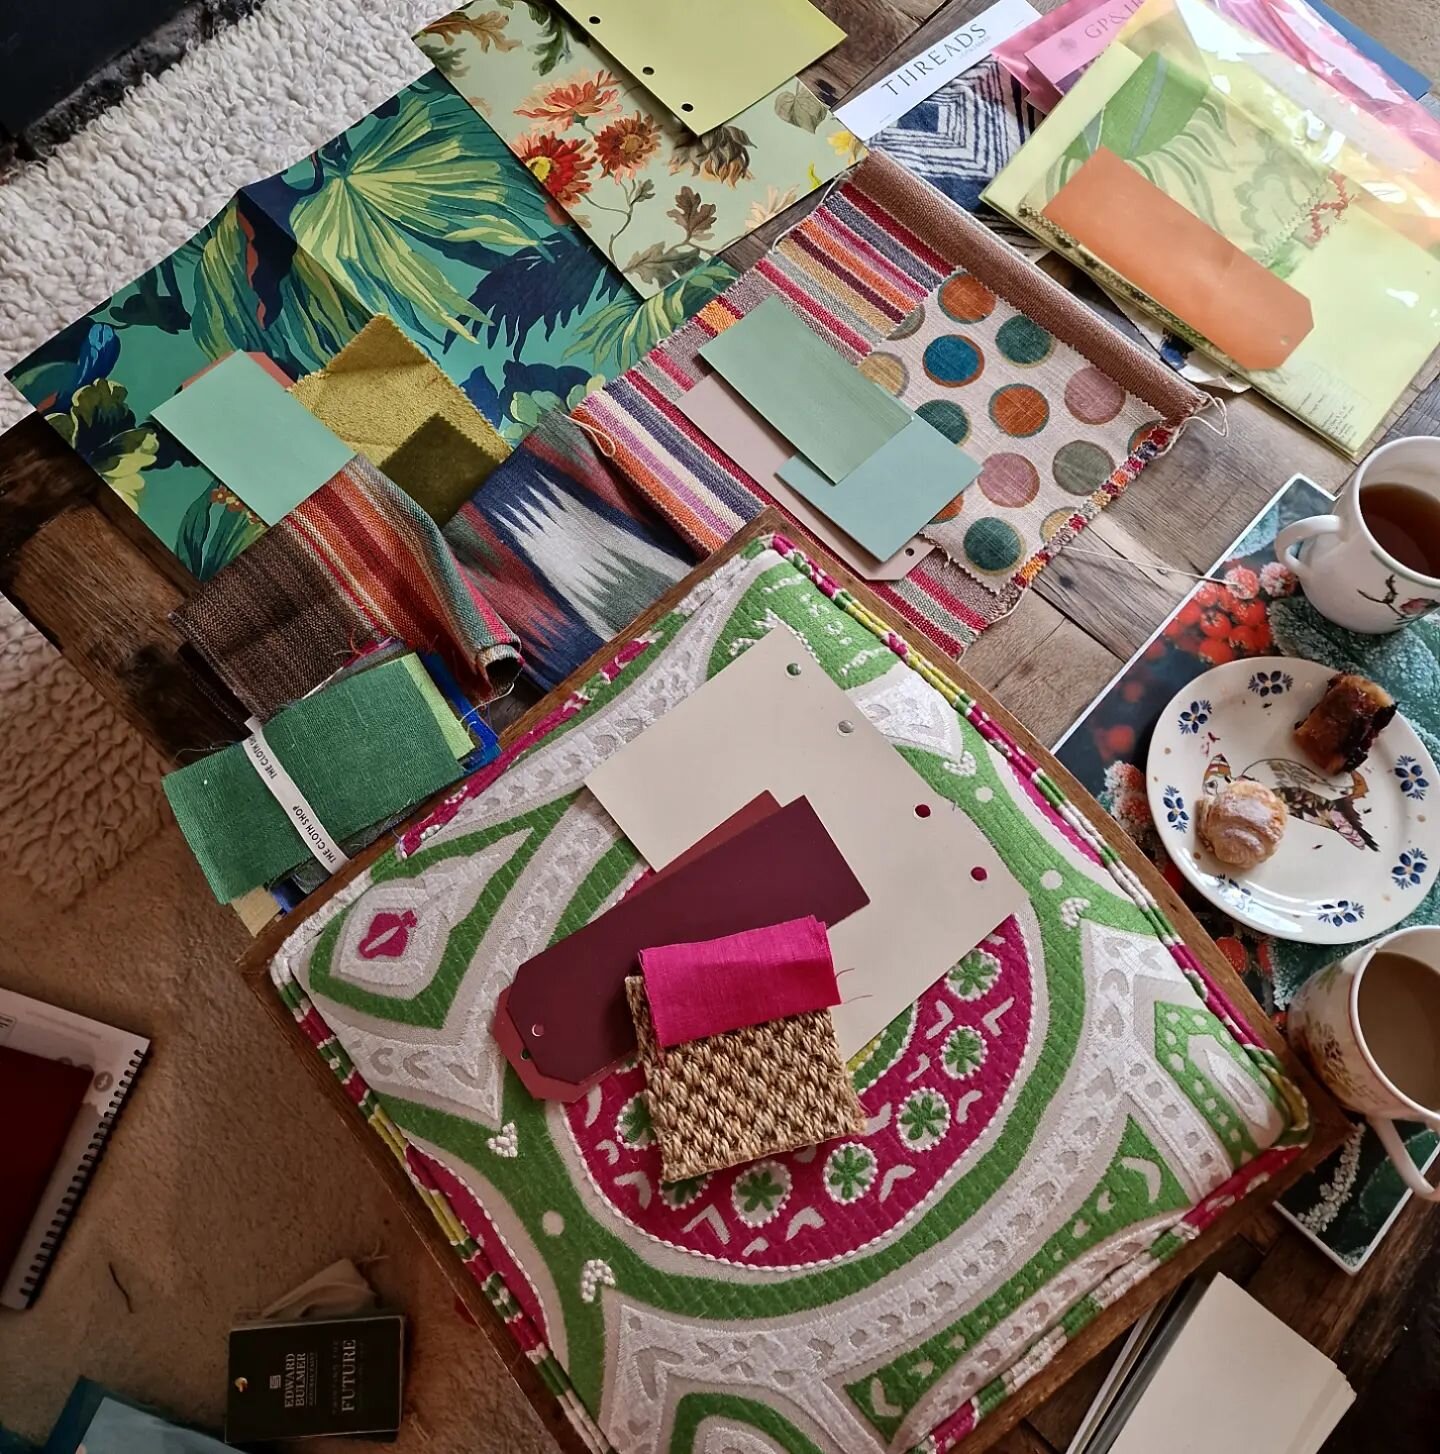 A vibrant scheme in the making. Accompanied with tea and cake